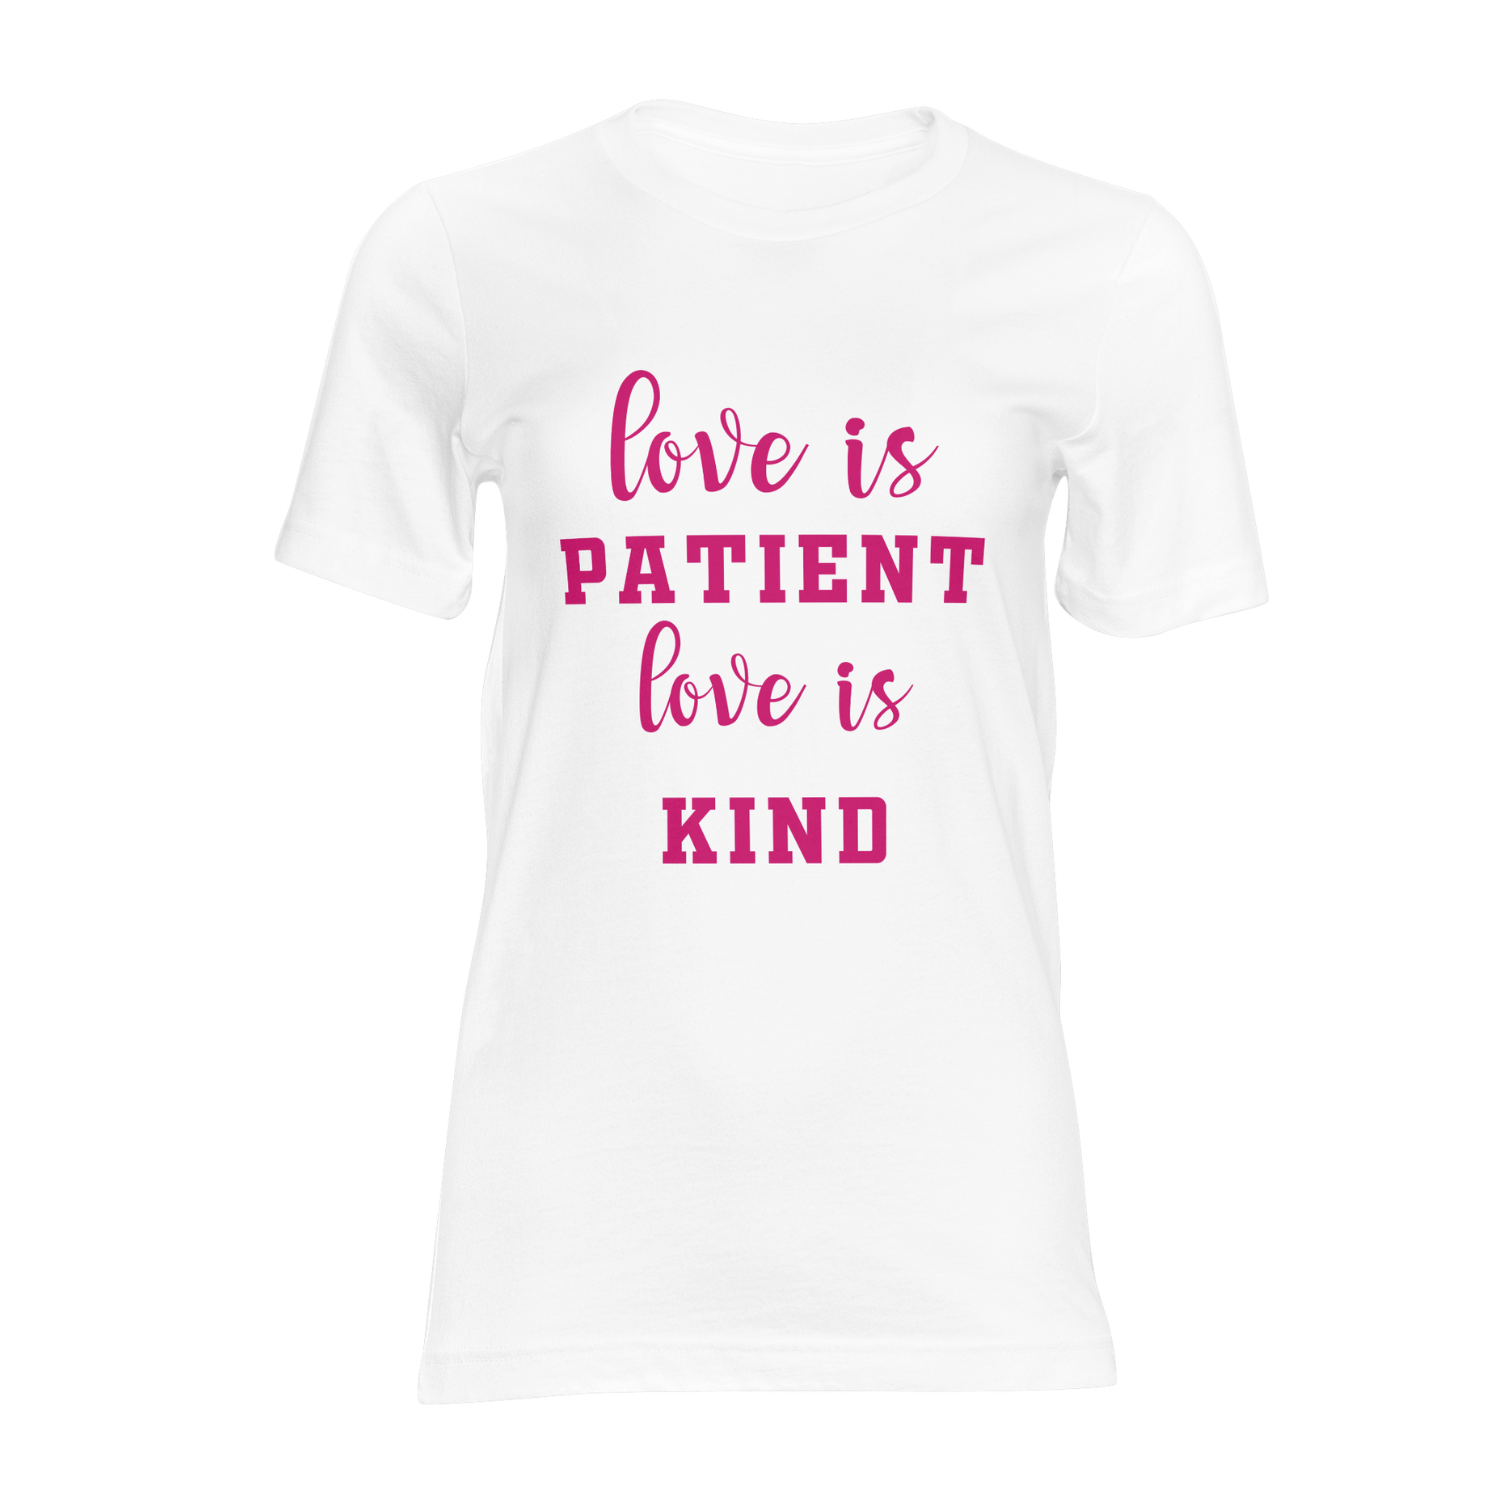 Love is patient love is kind SVG | Digital Download | Cut File | SVG Only The Sweet Stuff